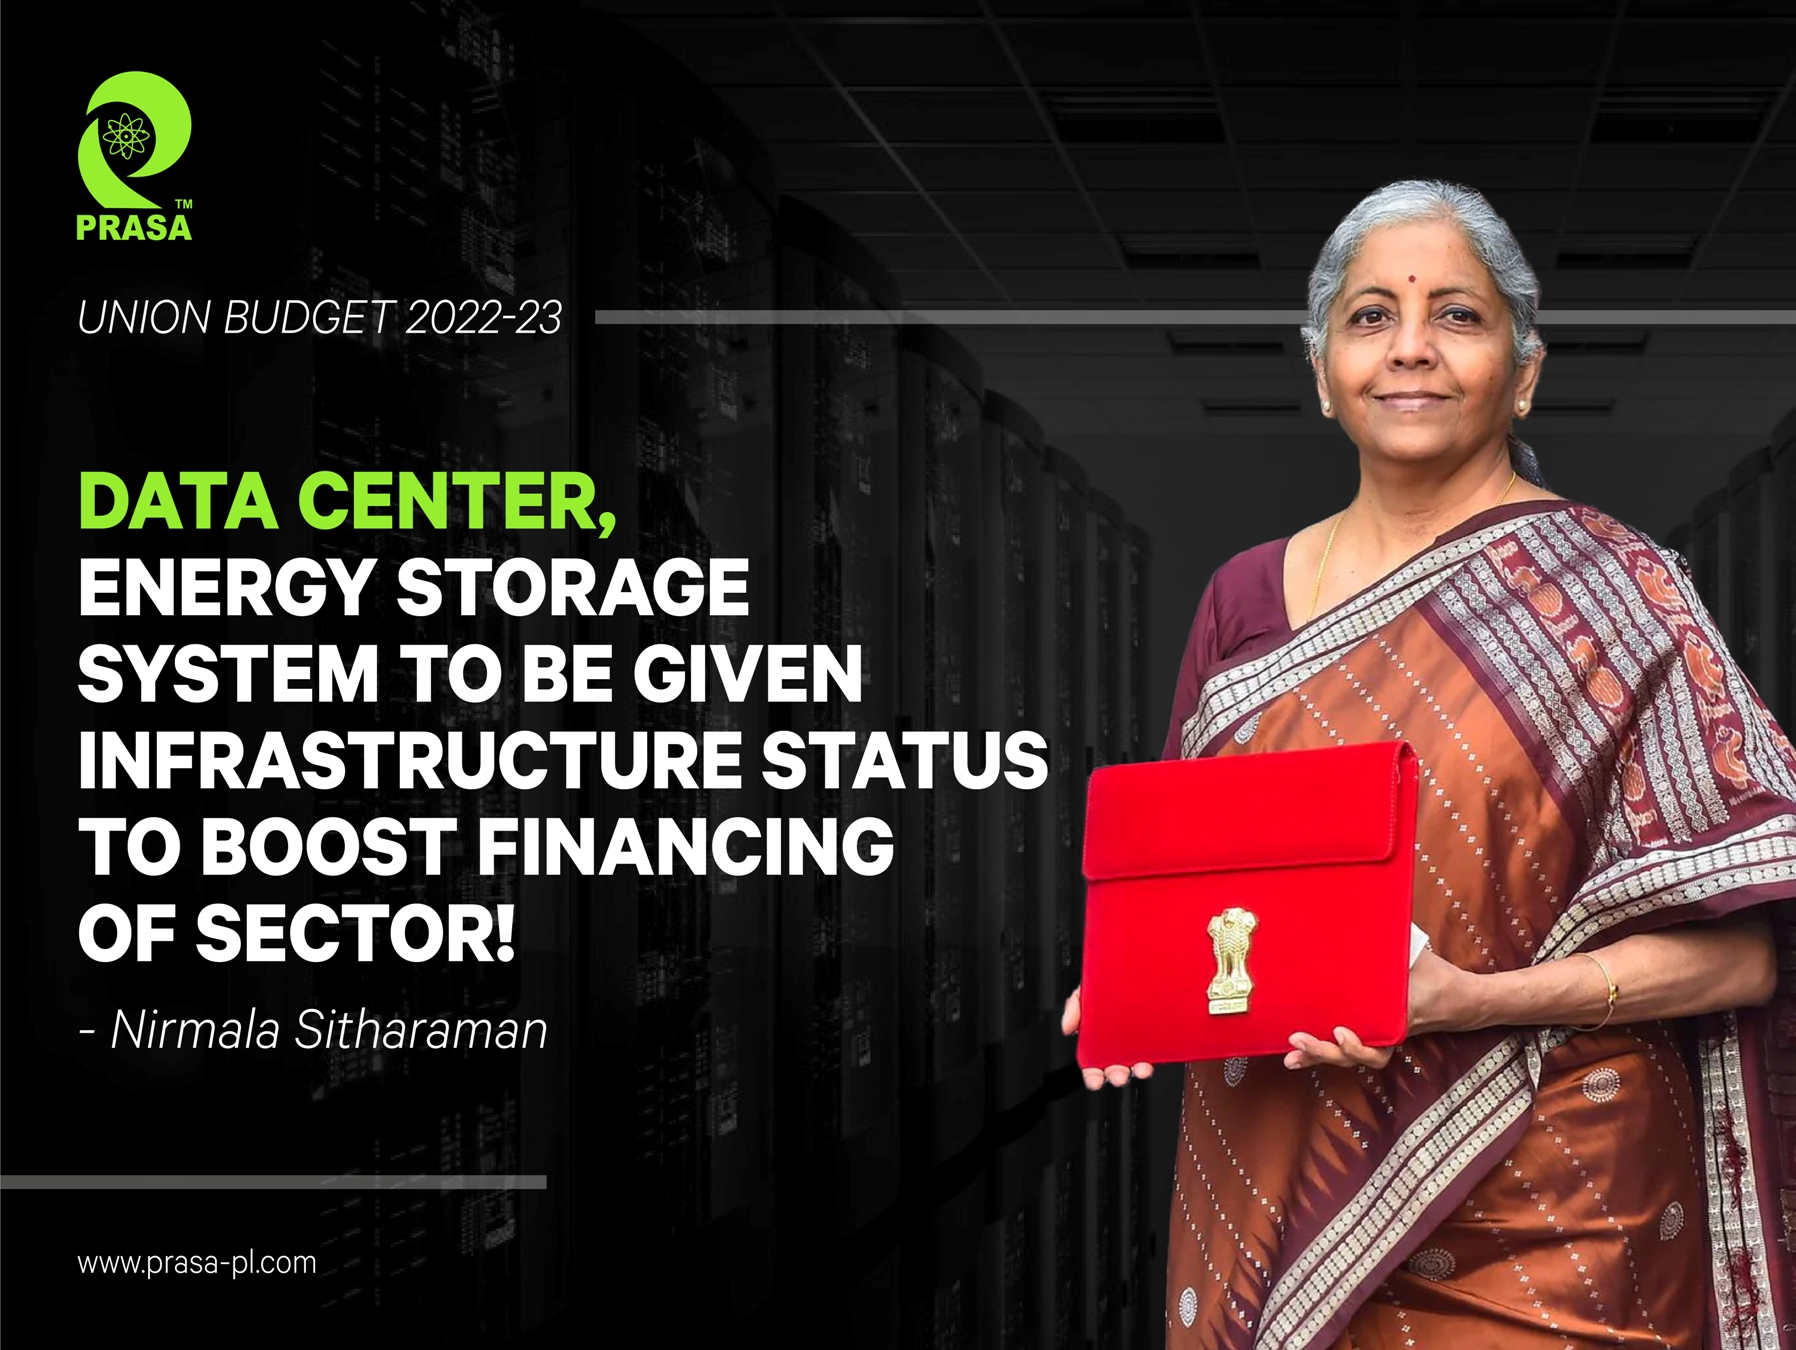 Union Budget 2022-23: Data center, energy storage system to be given infrastructure status, says Finance Minister Nirmala Sitharaman